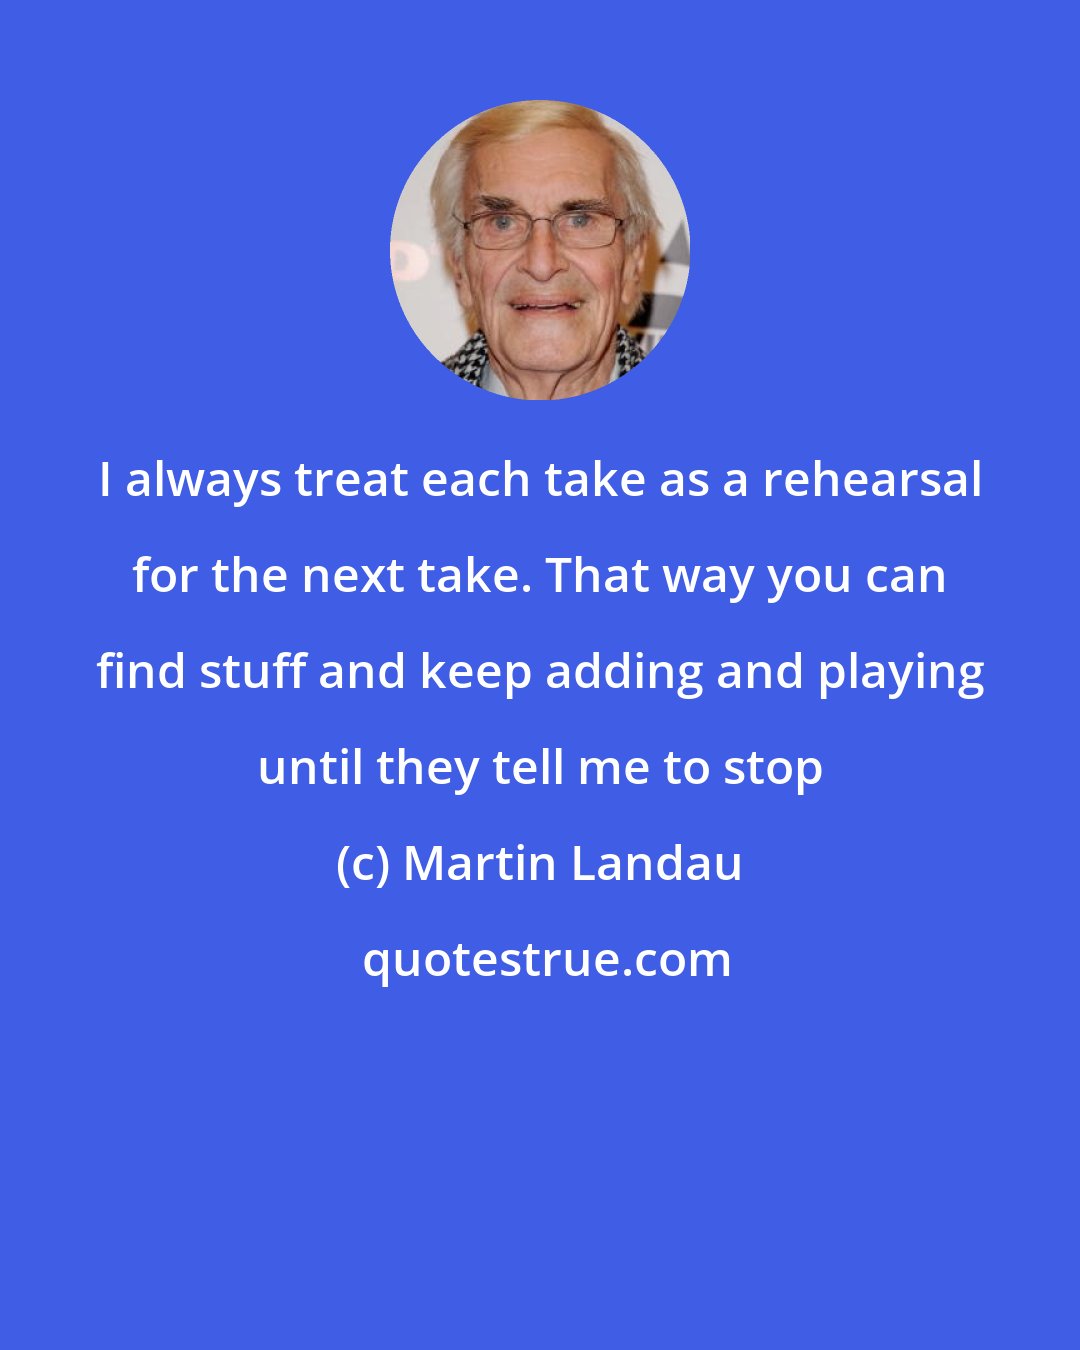 Martin Landau: I always treat each take as a rehearsal for the next take. That way you can find stuff and keep adding and playing until they tell me to stop